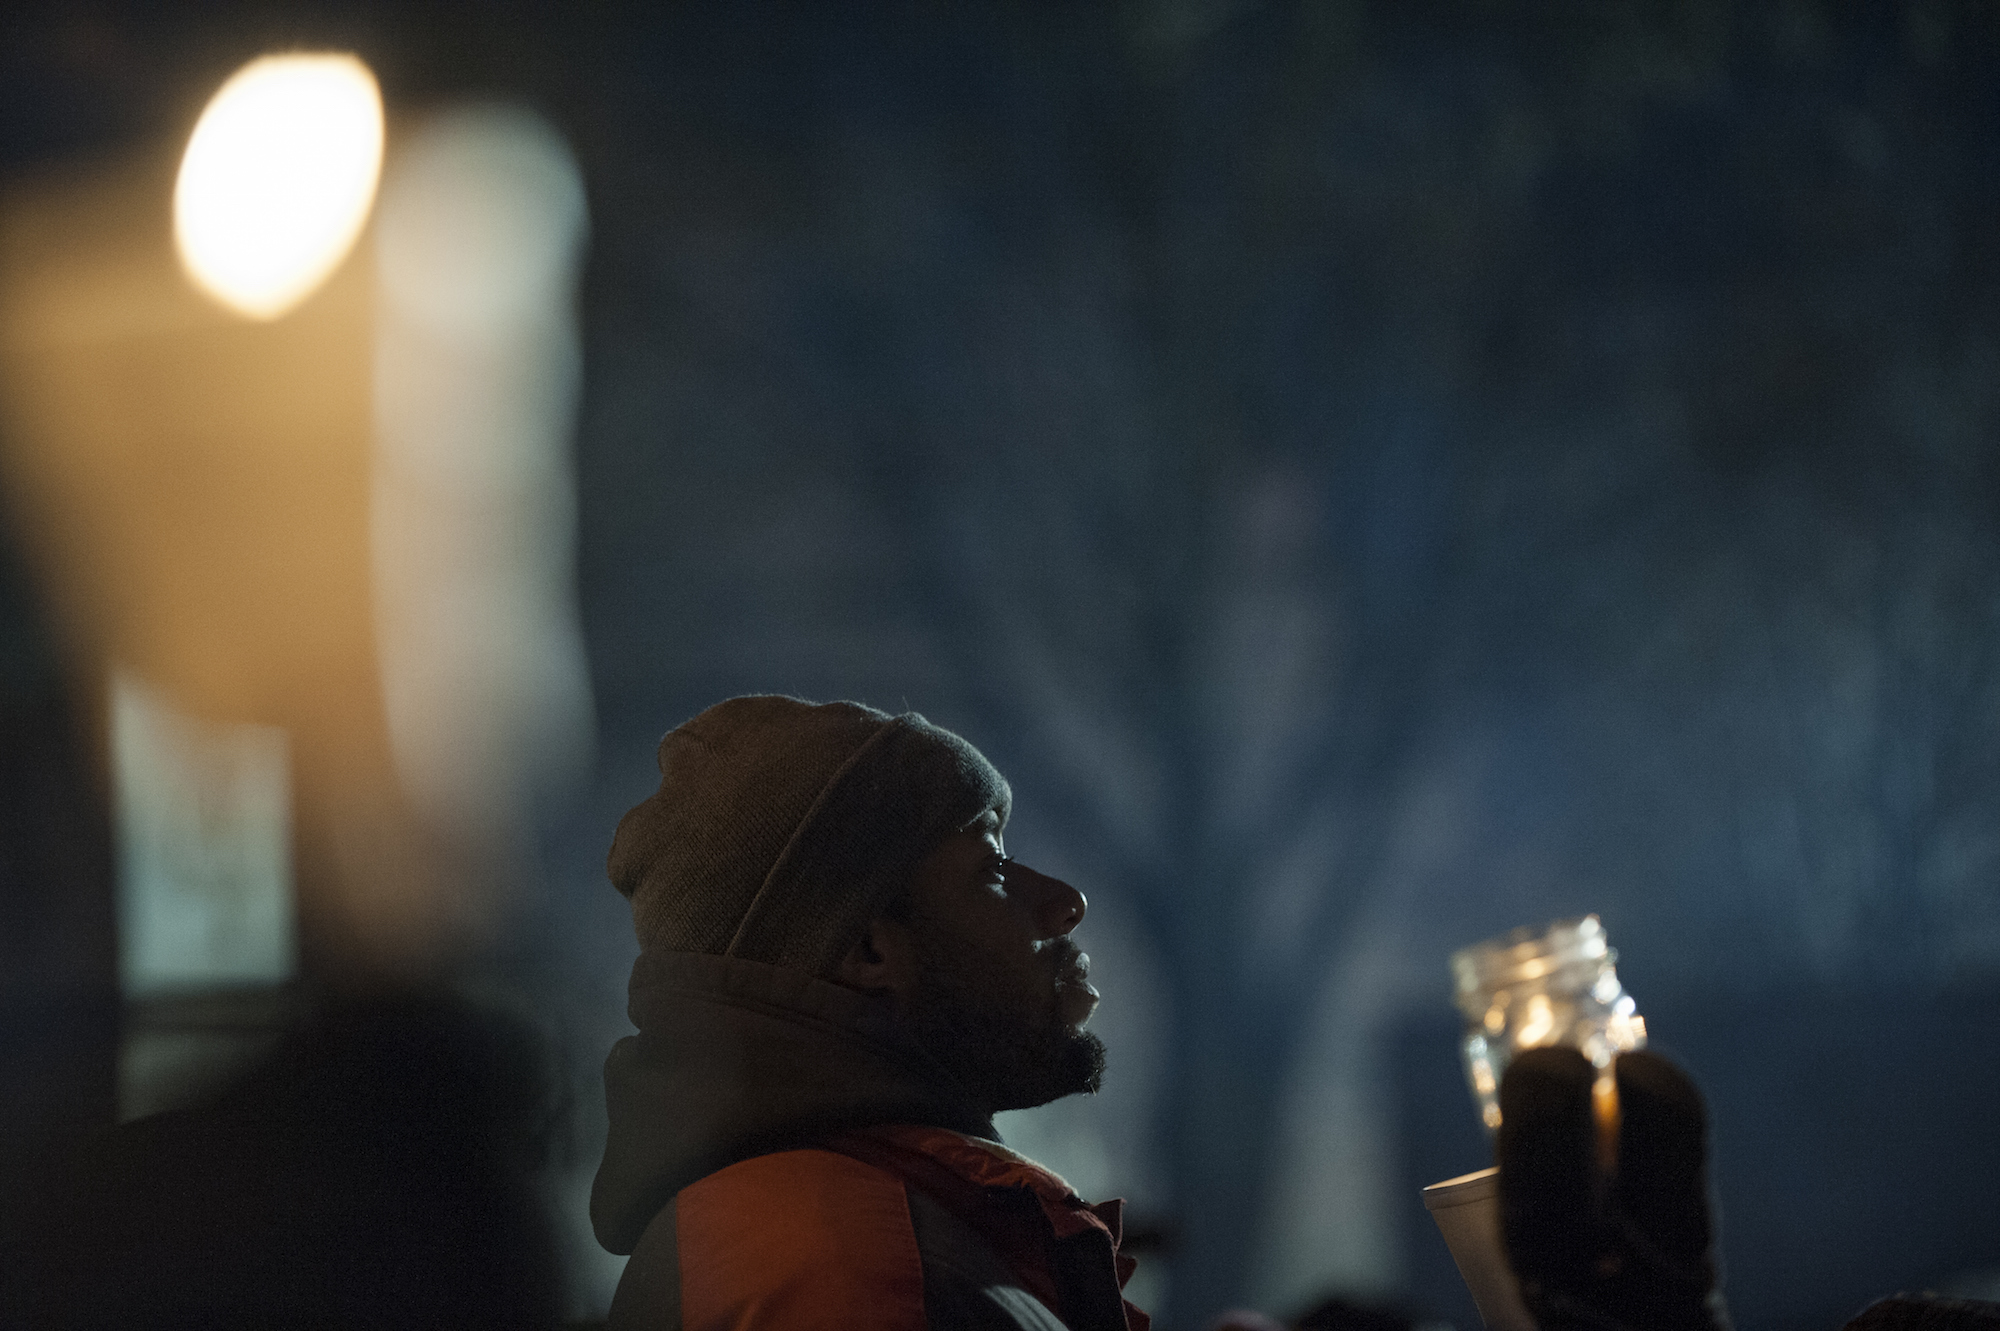 Protestors, activists, and community members listen to speeches at a candlelight vigil held for Jamar Clark on November 20 in Minneapolis, Minnesota. (Stephen Maturen/Getty Images)